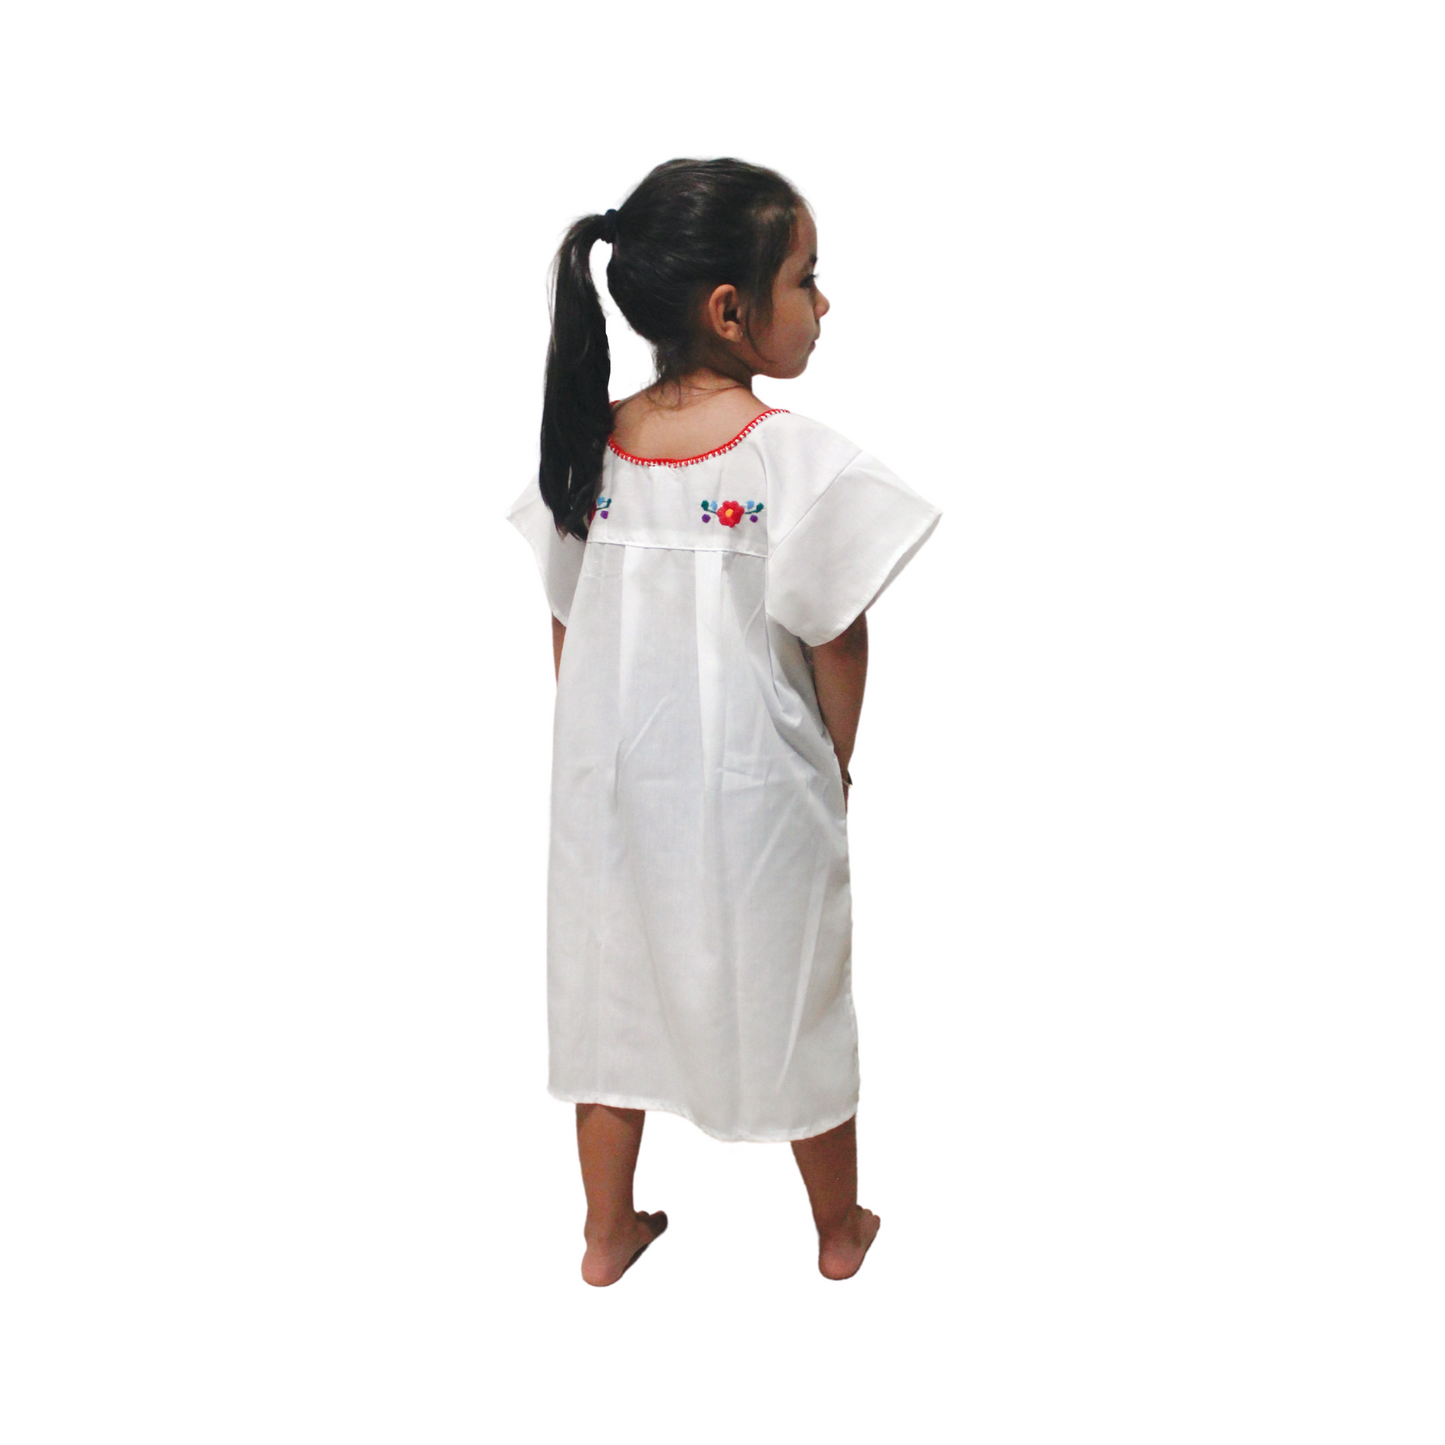 Embroidered Dress Kids	White